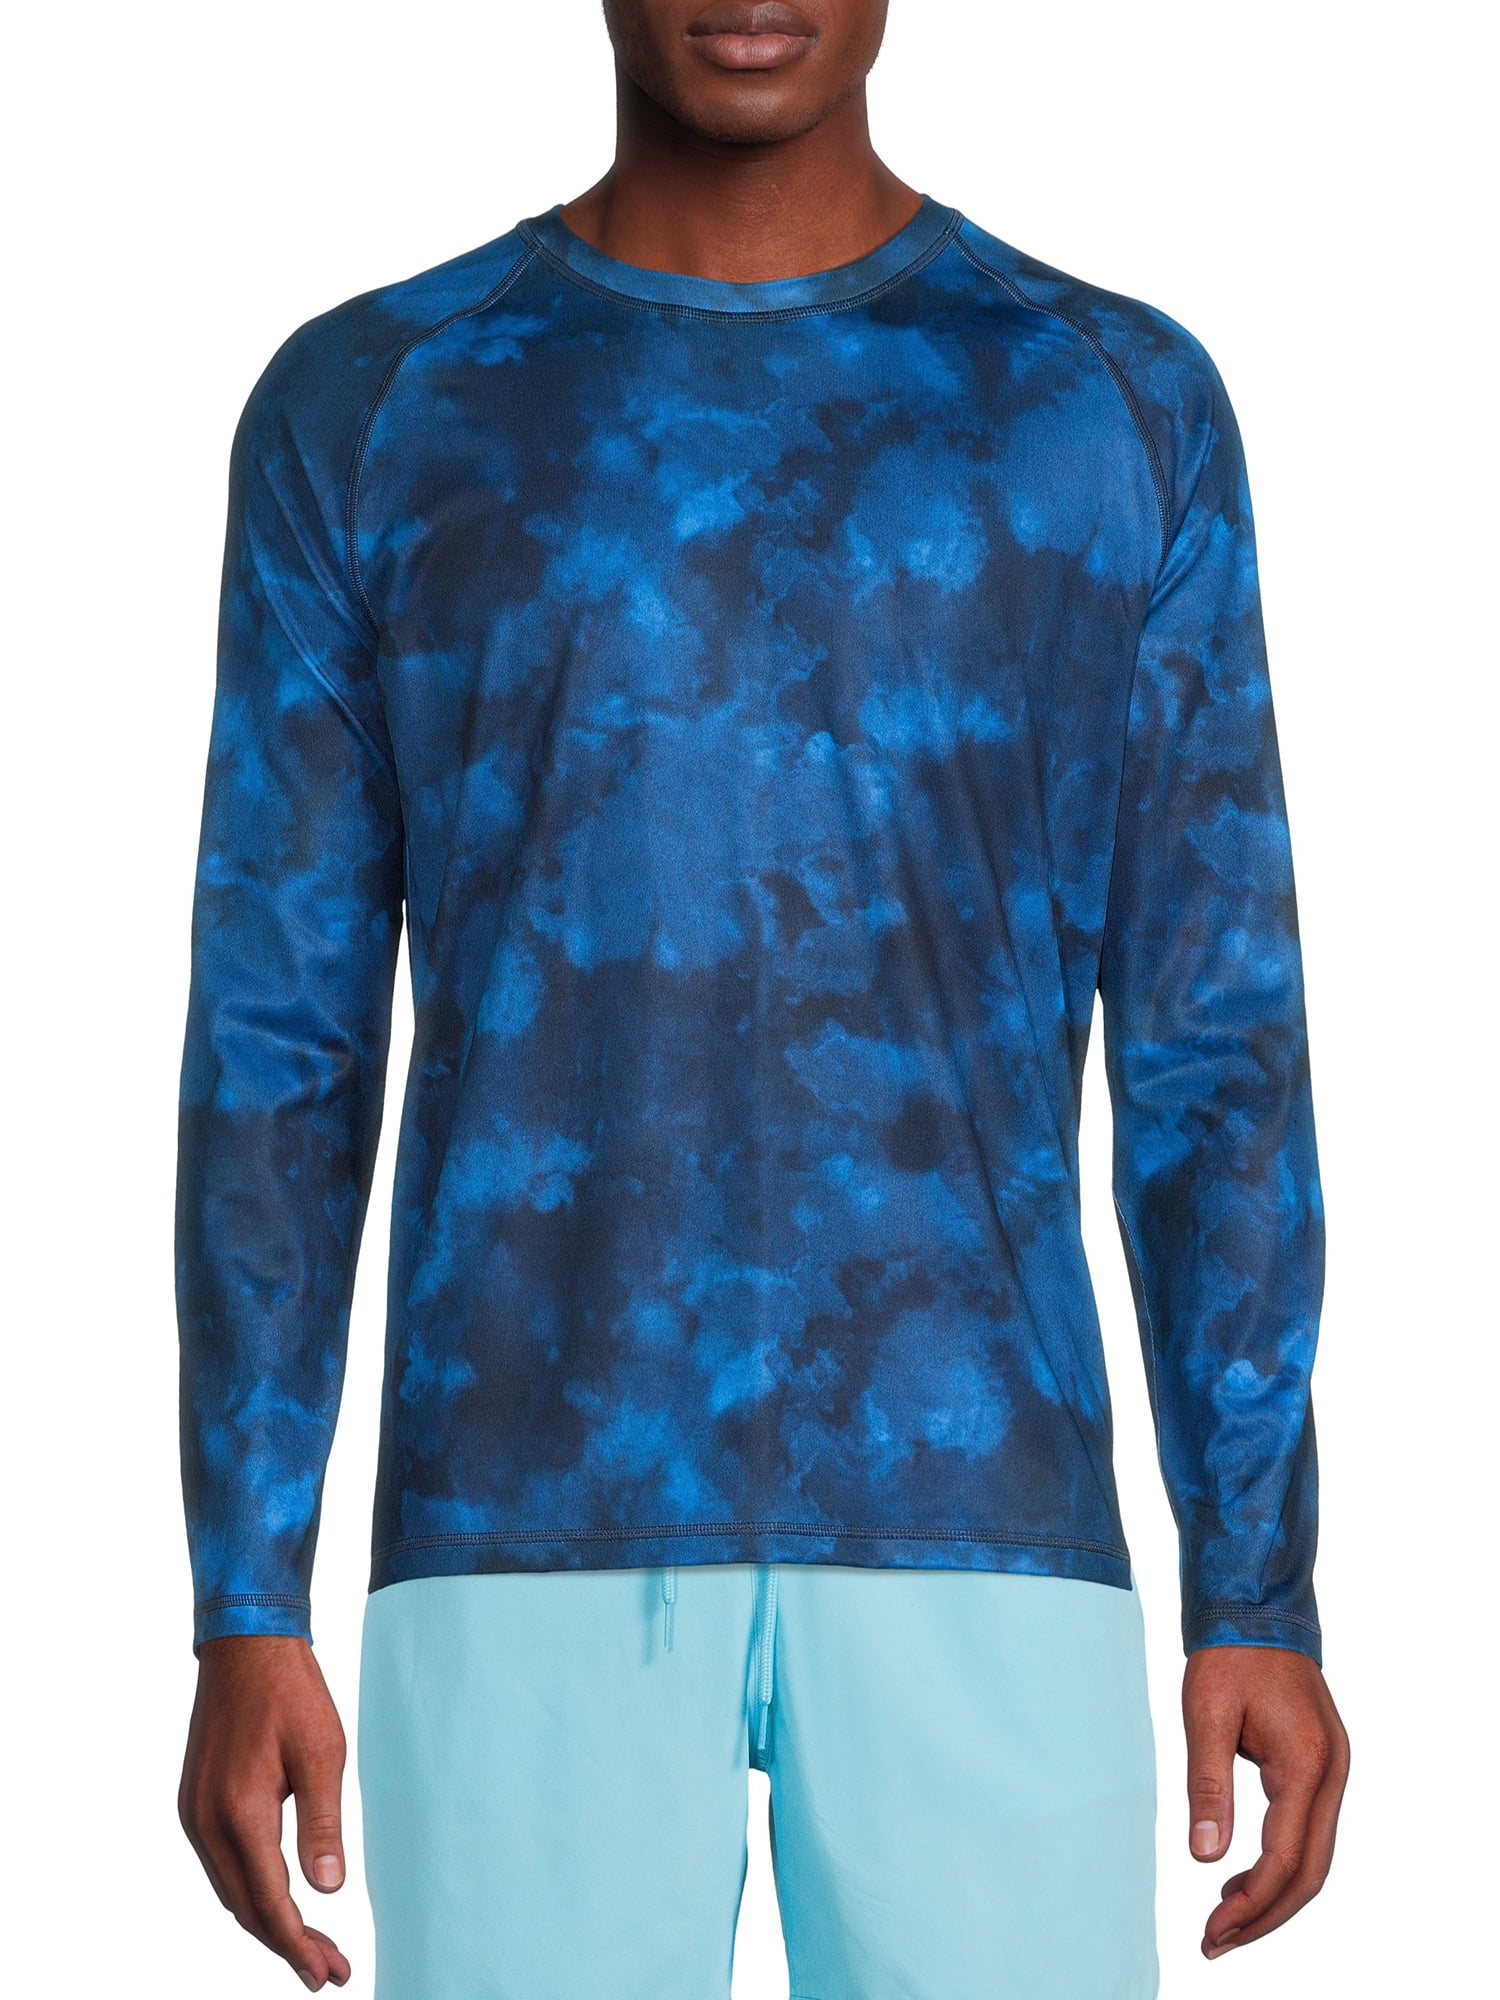 George Men's and Big Men's Long Sleeve Rash Guard, Sizes up to 3XL